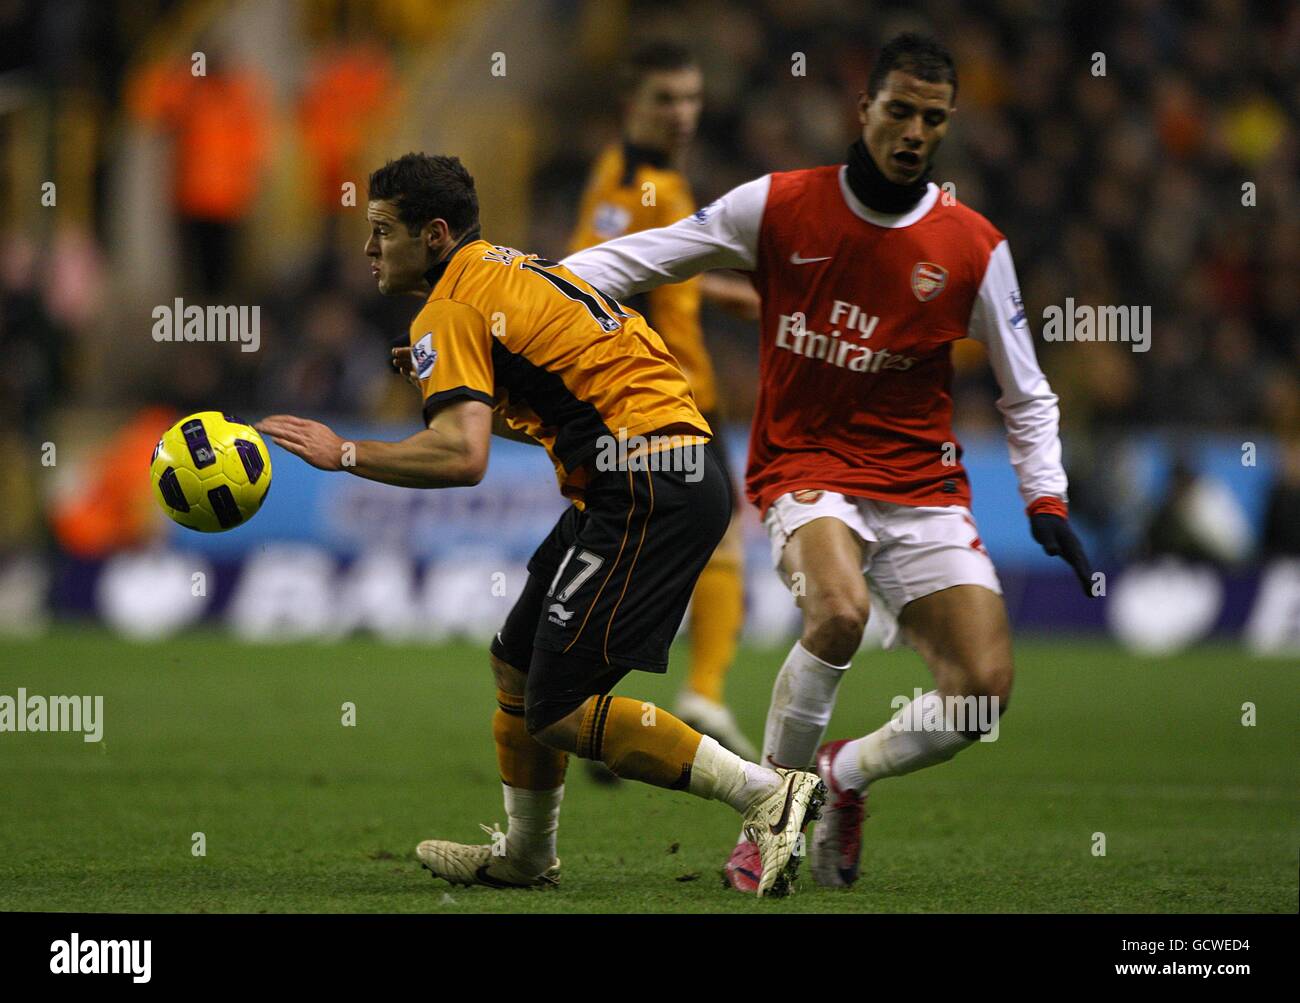 Wolverhampton Wanderers' Matthew Jarvis (left) and Arsenal's Marouane Chamakh collide as they battle for the ball Stock Photo